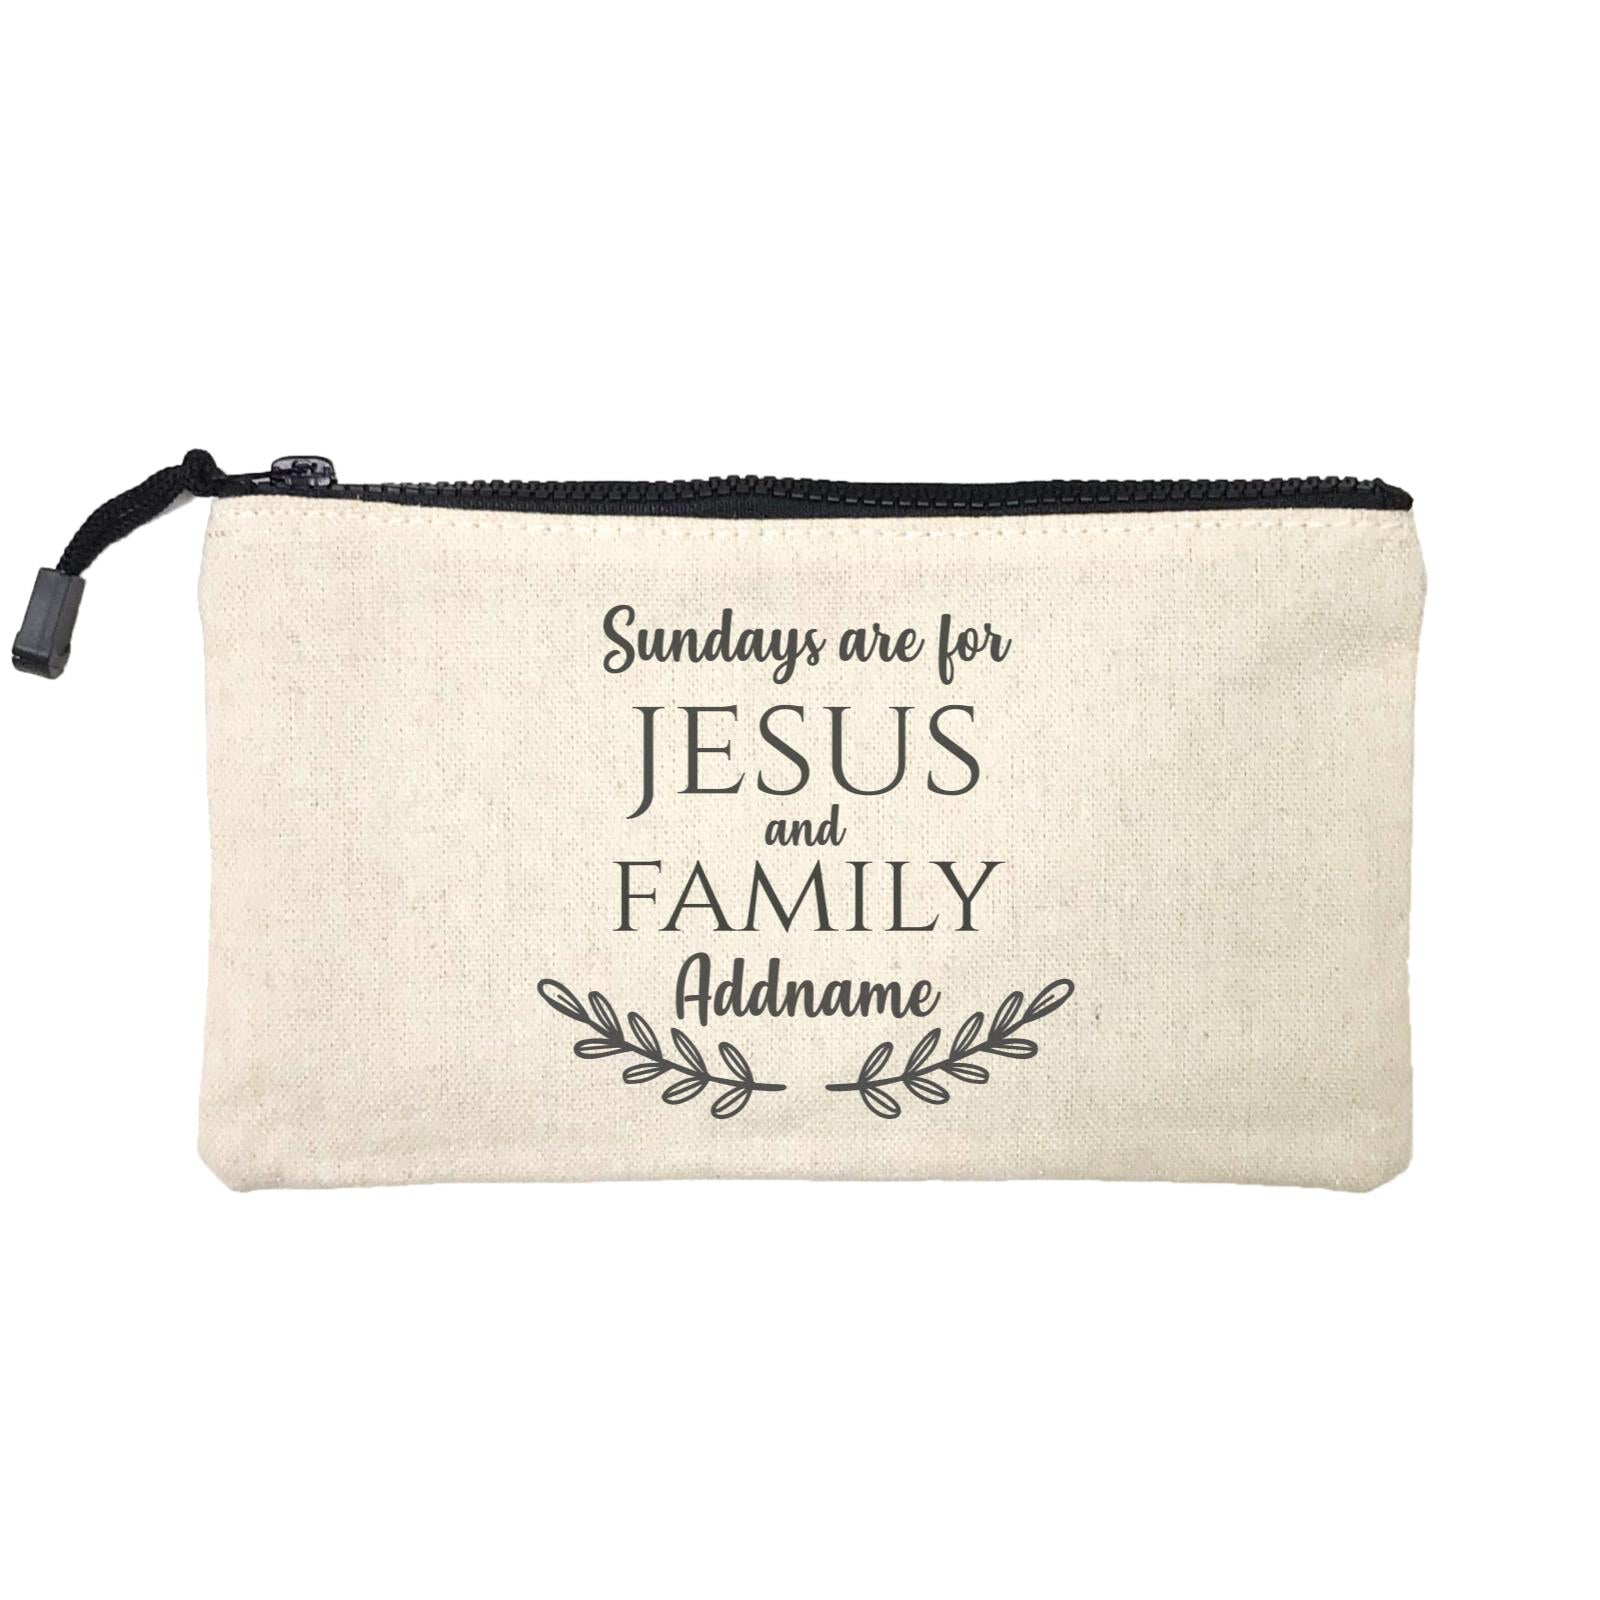 Christian Series Sundays Are For Jesus And Family Addname Mini Accessories Stationery Pouch